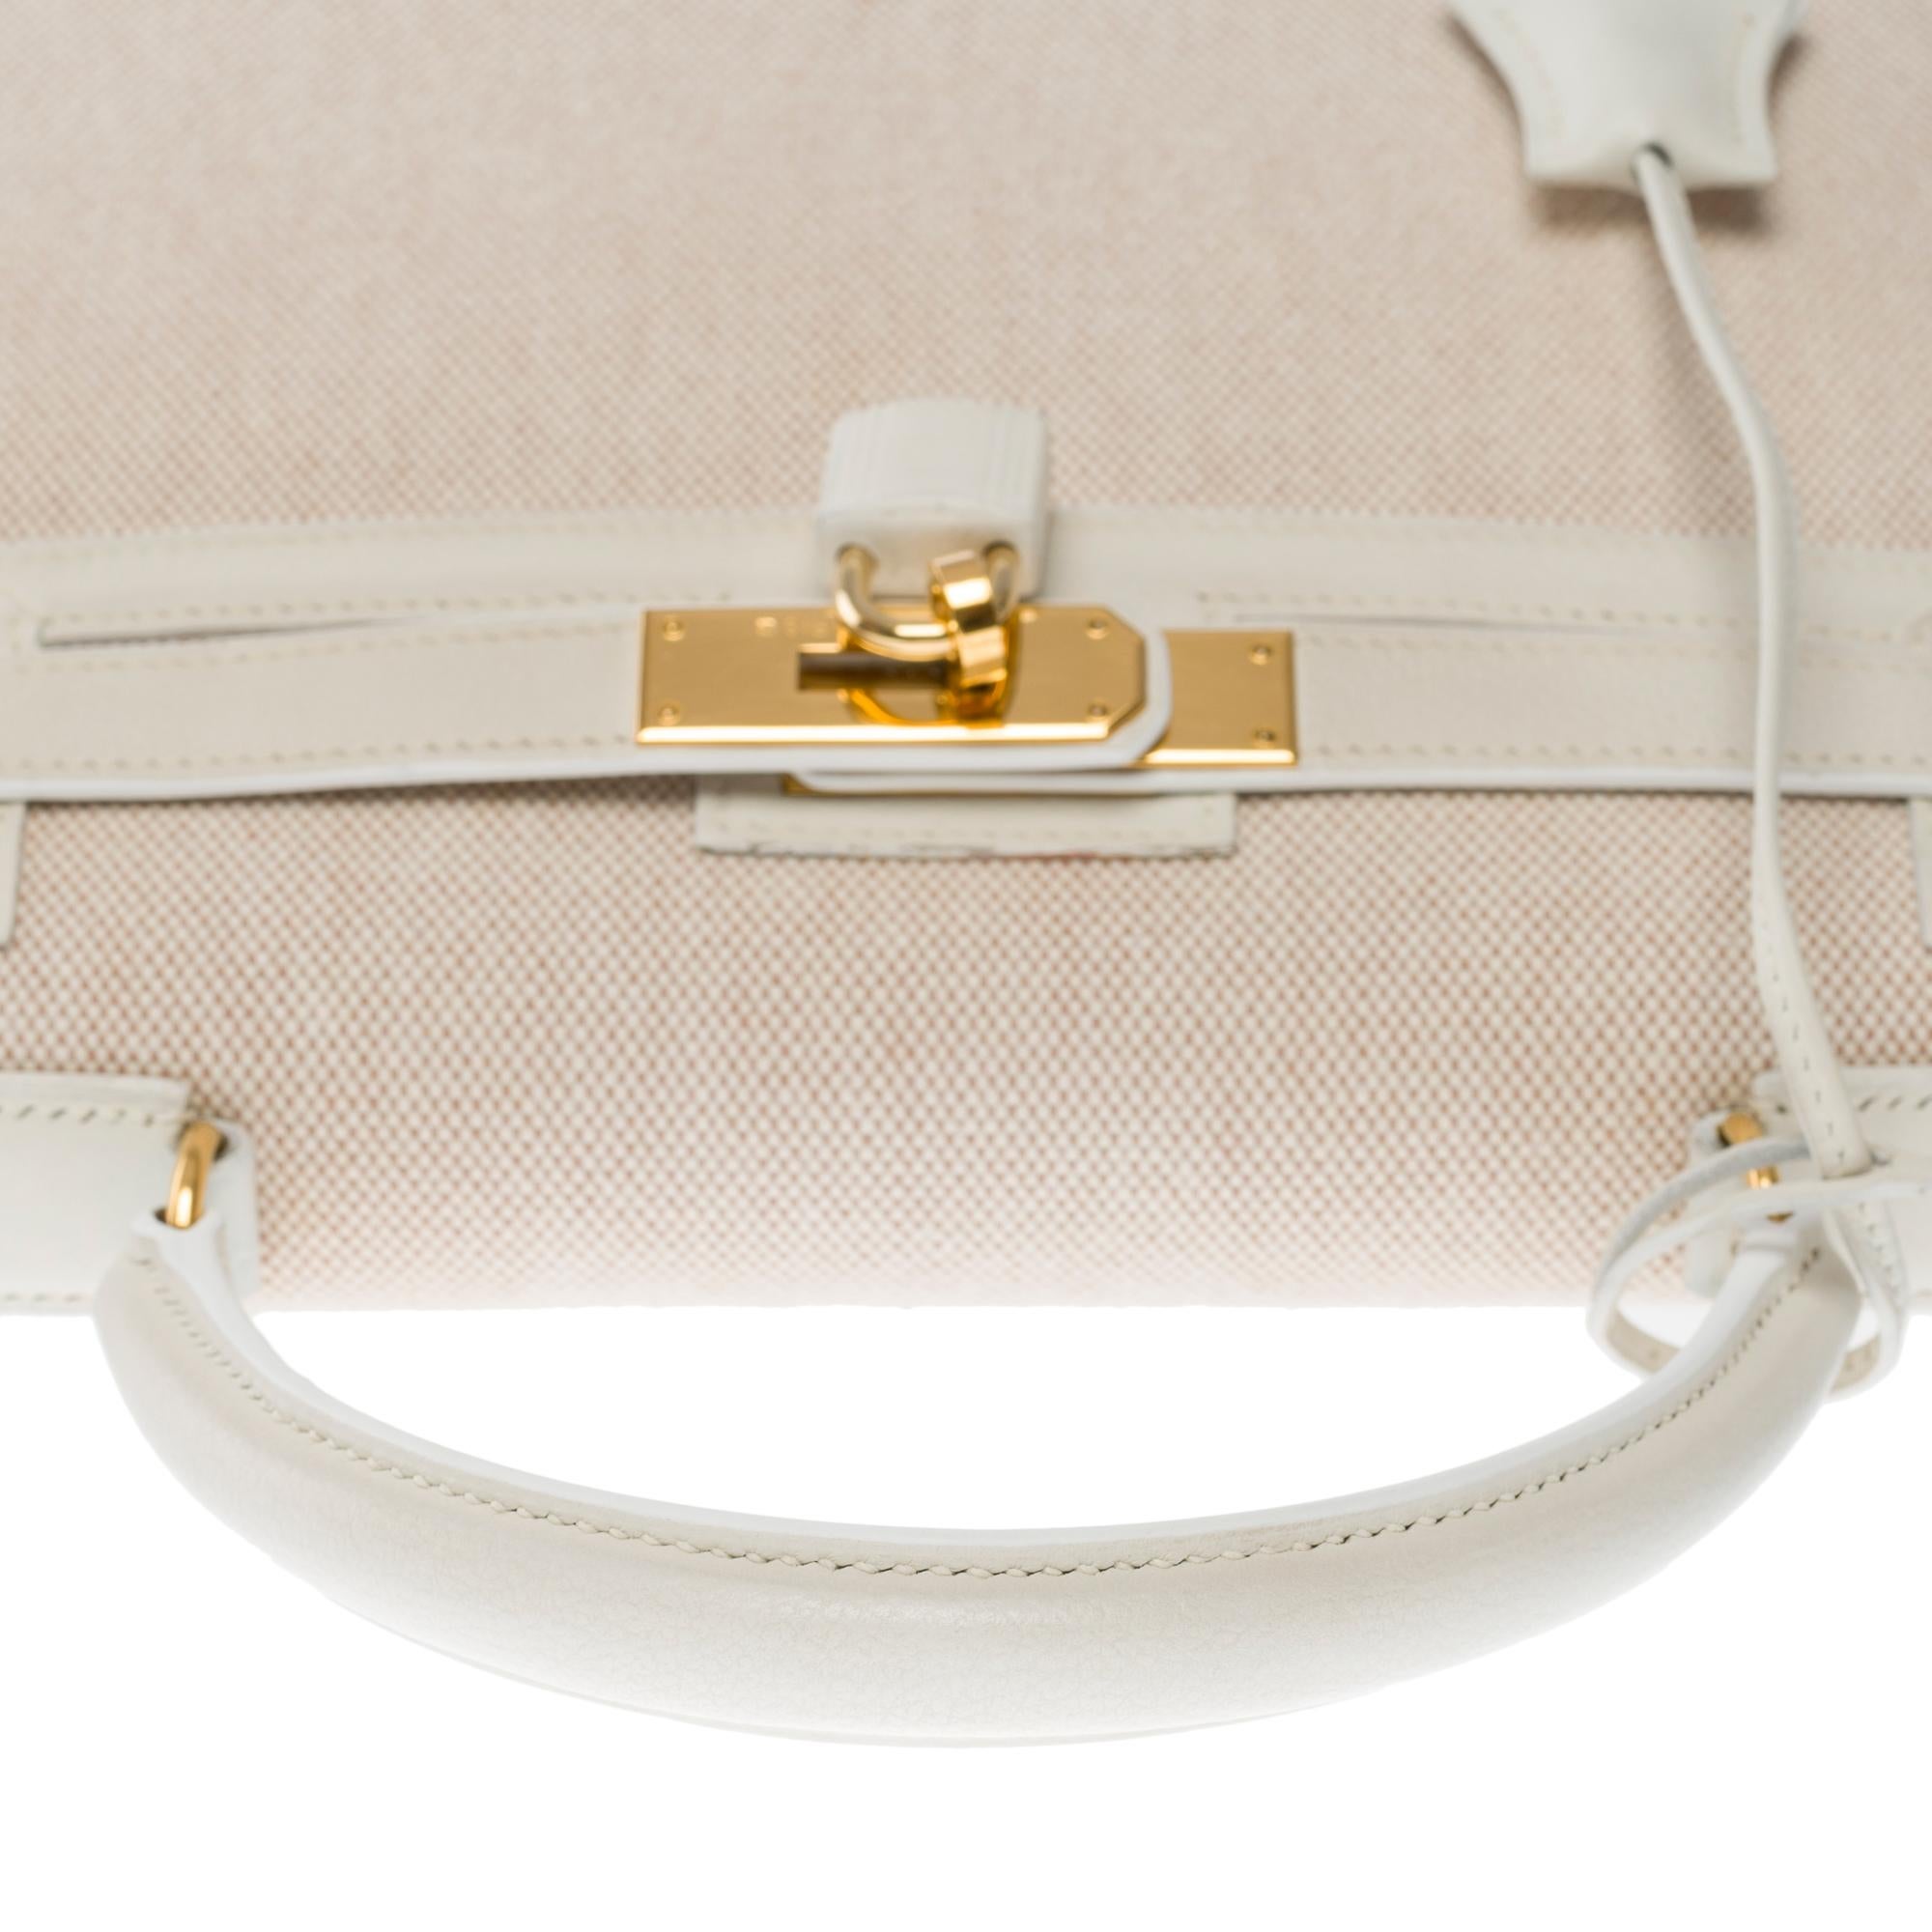 Hermès Kelly 28 sellier handbag strap in White canvas and Beige leather, GHW 4